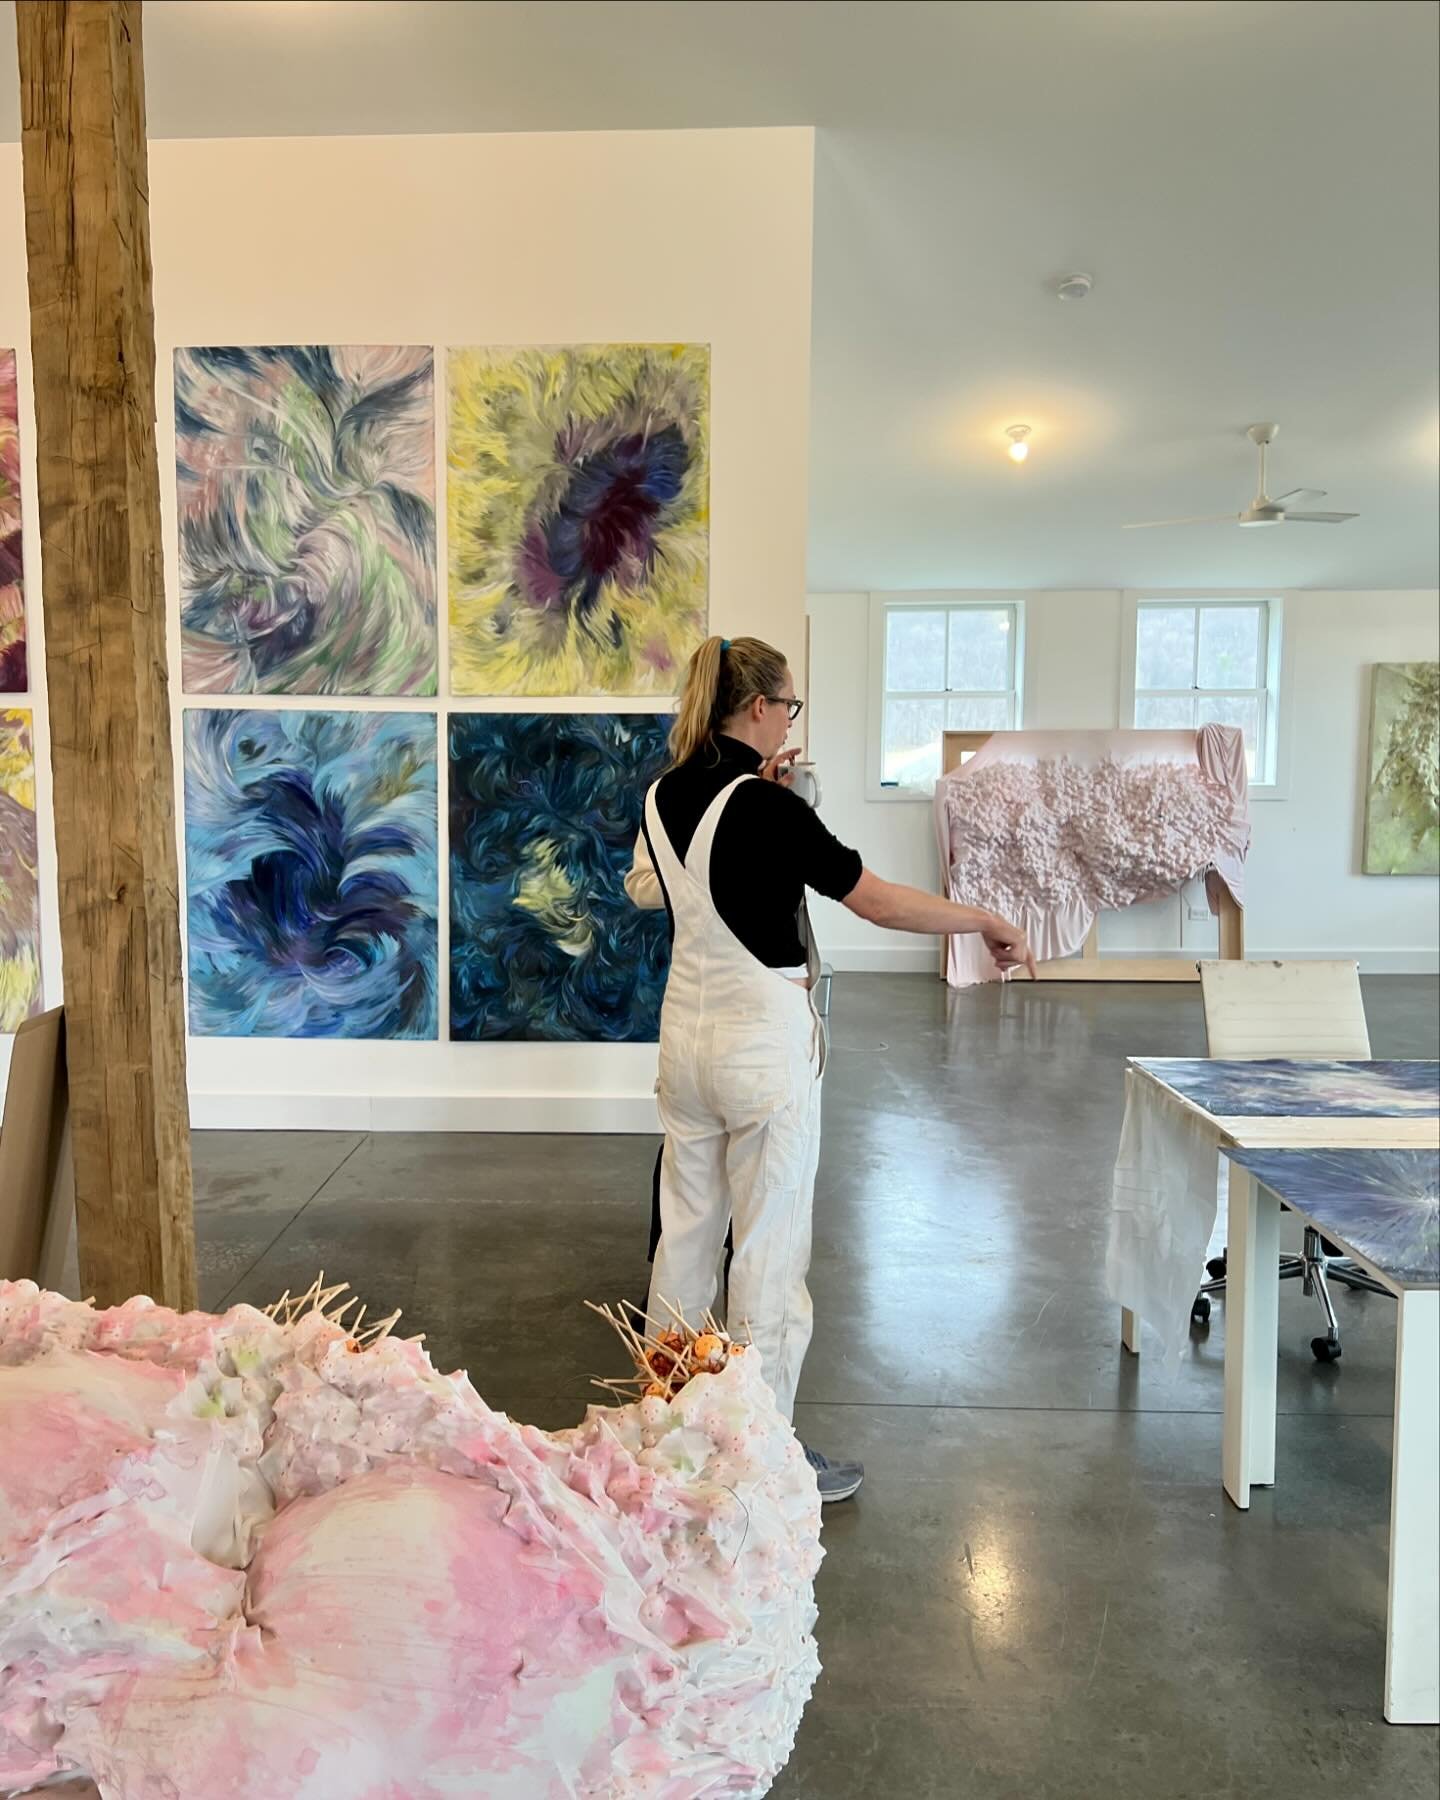 Such a great studio visit with @juliavoneichel. Really loved seeing her awesome upstate studio space. She has definitely been very busy creating some stunning work and hearing more about her journey as an artist. This is definitely the best part of t